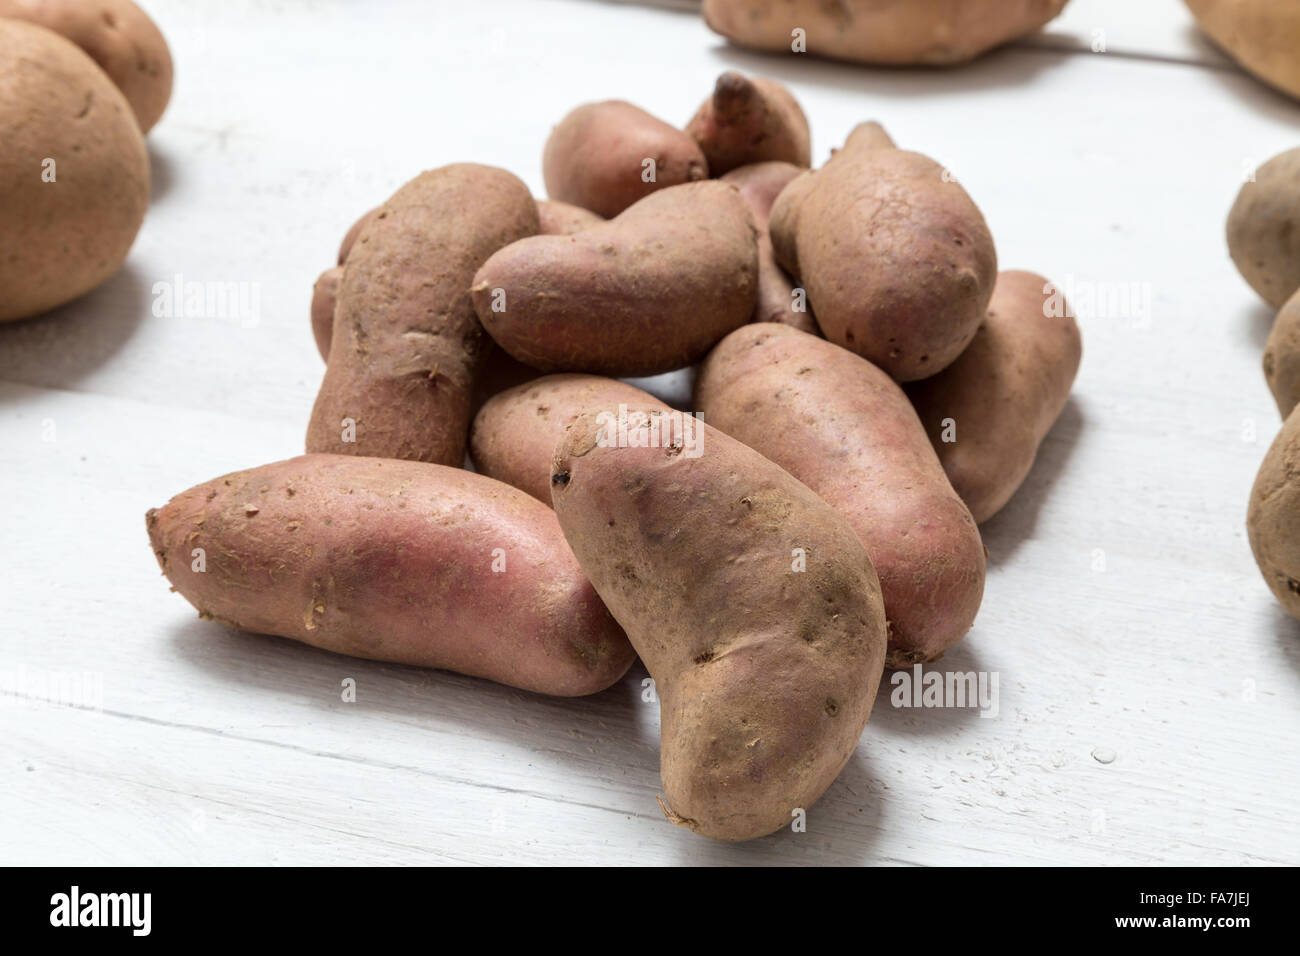 Potatoes on white wooden board Concept. Stock Photo